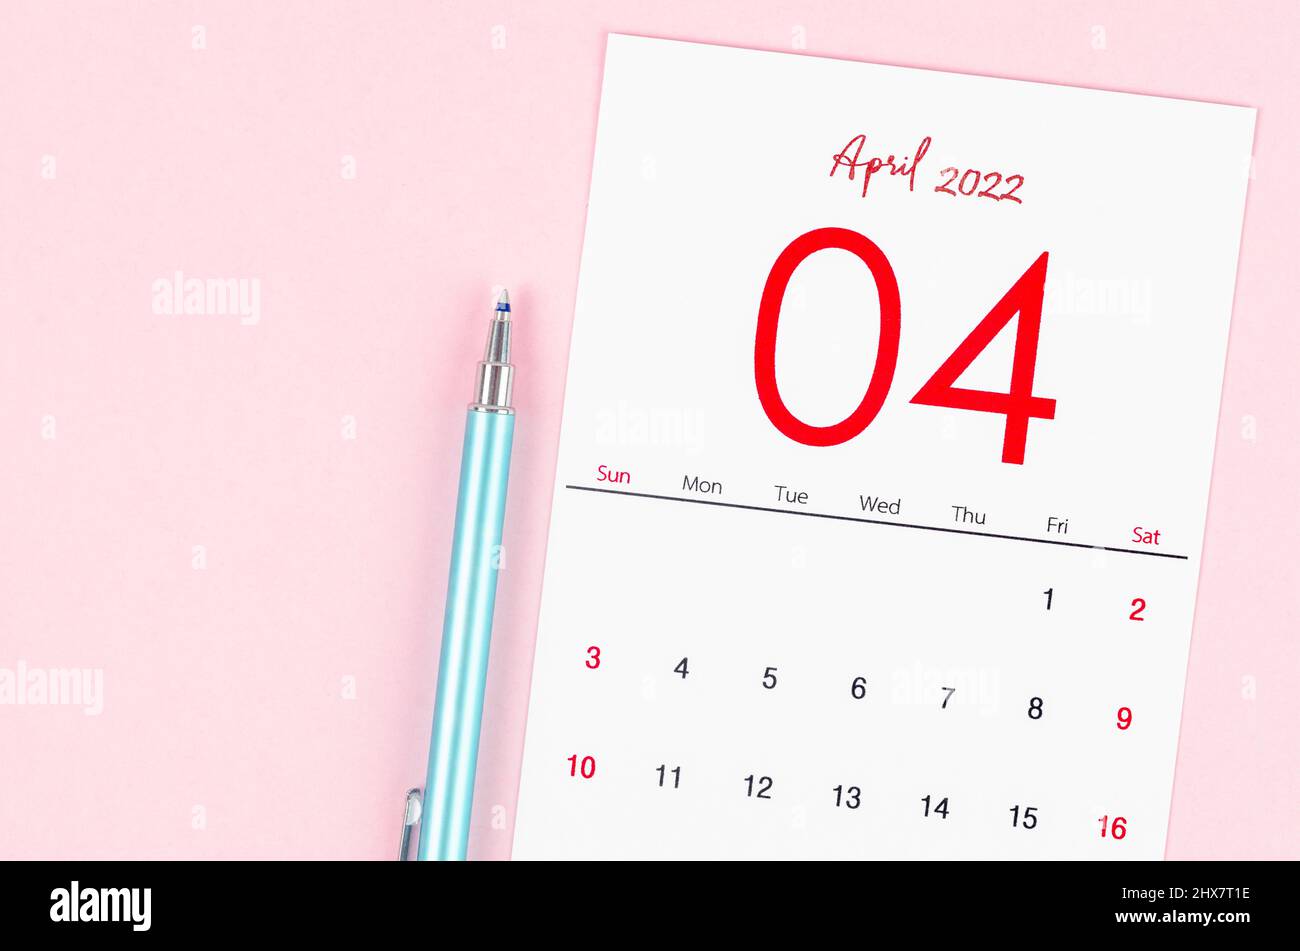 The April 2022 calendar with pen on pink background. Stock Photo